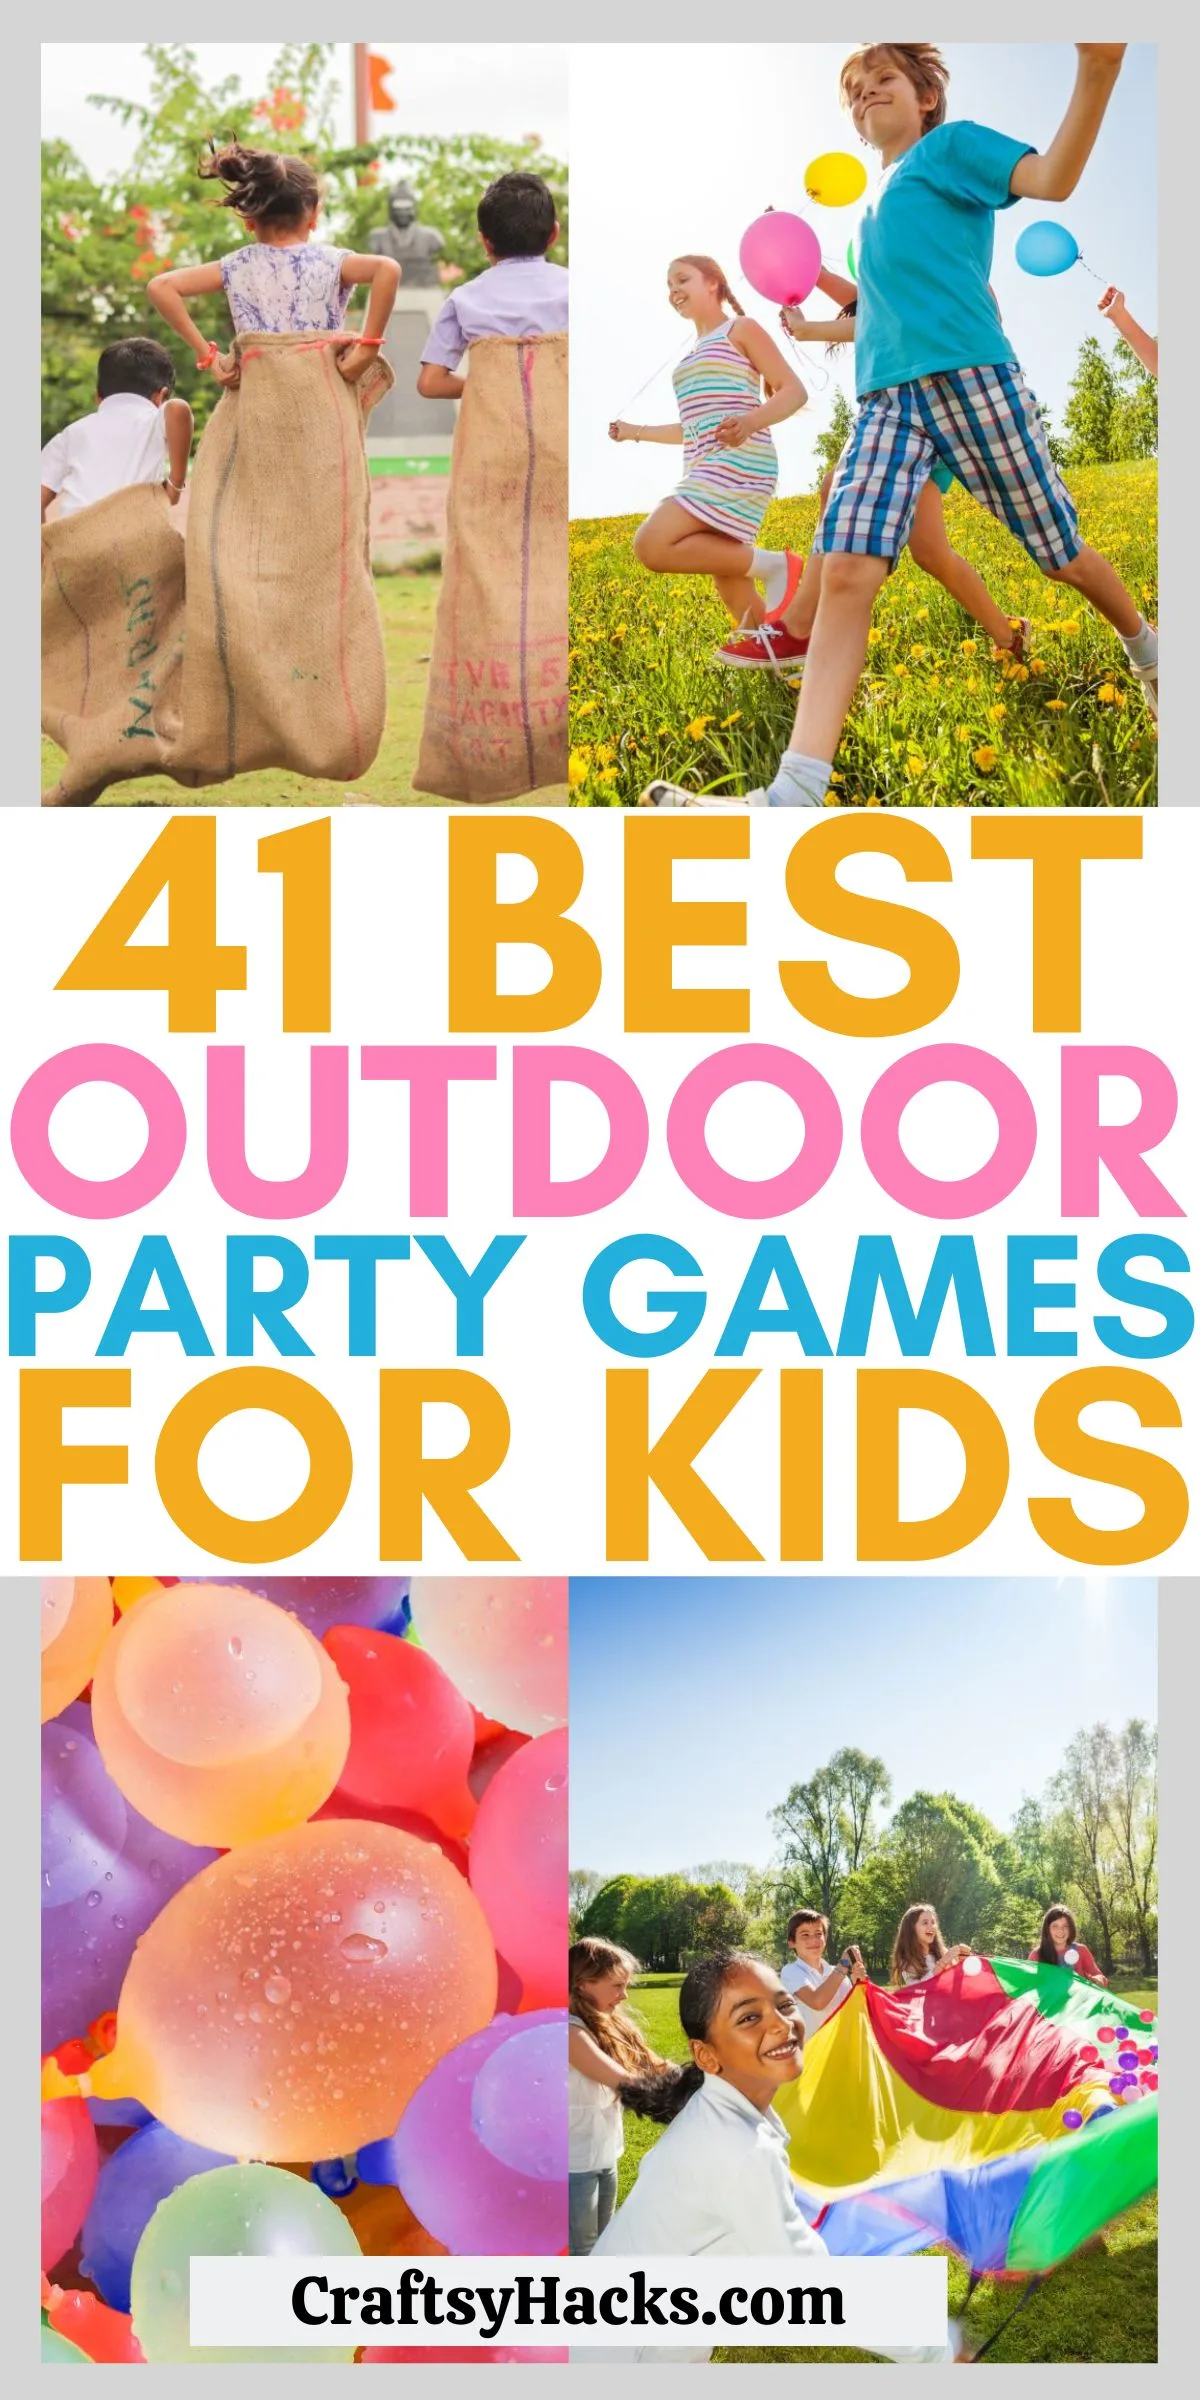 41 Best Outdoor Party Games for Kids Birthday - Craftsy Hacks